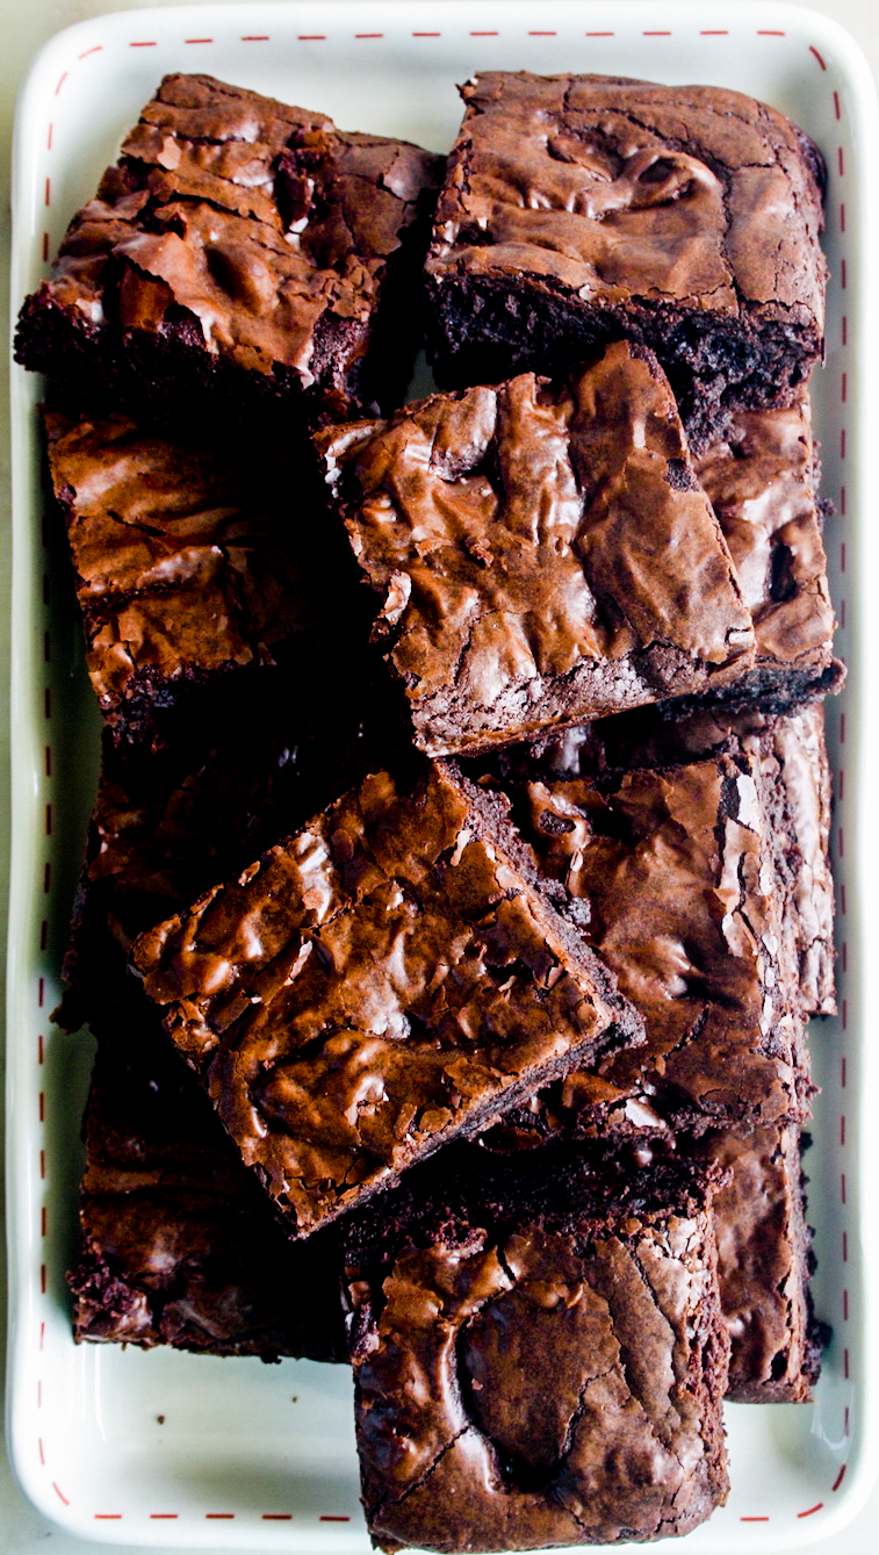 Rich, fudgy coffee brownies with lots of melty chocolate chips